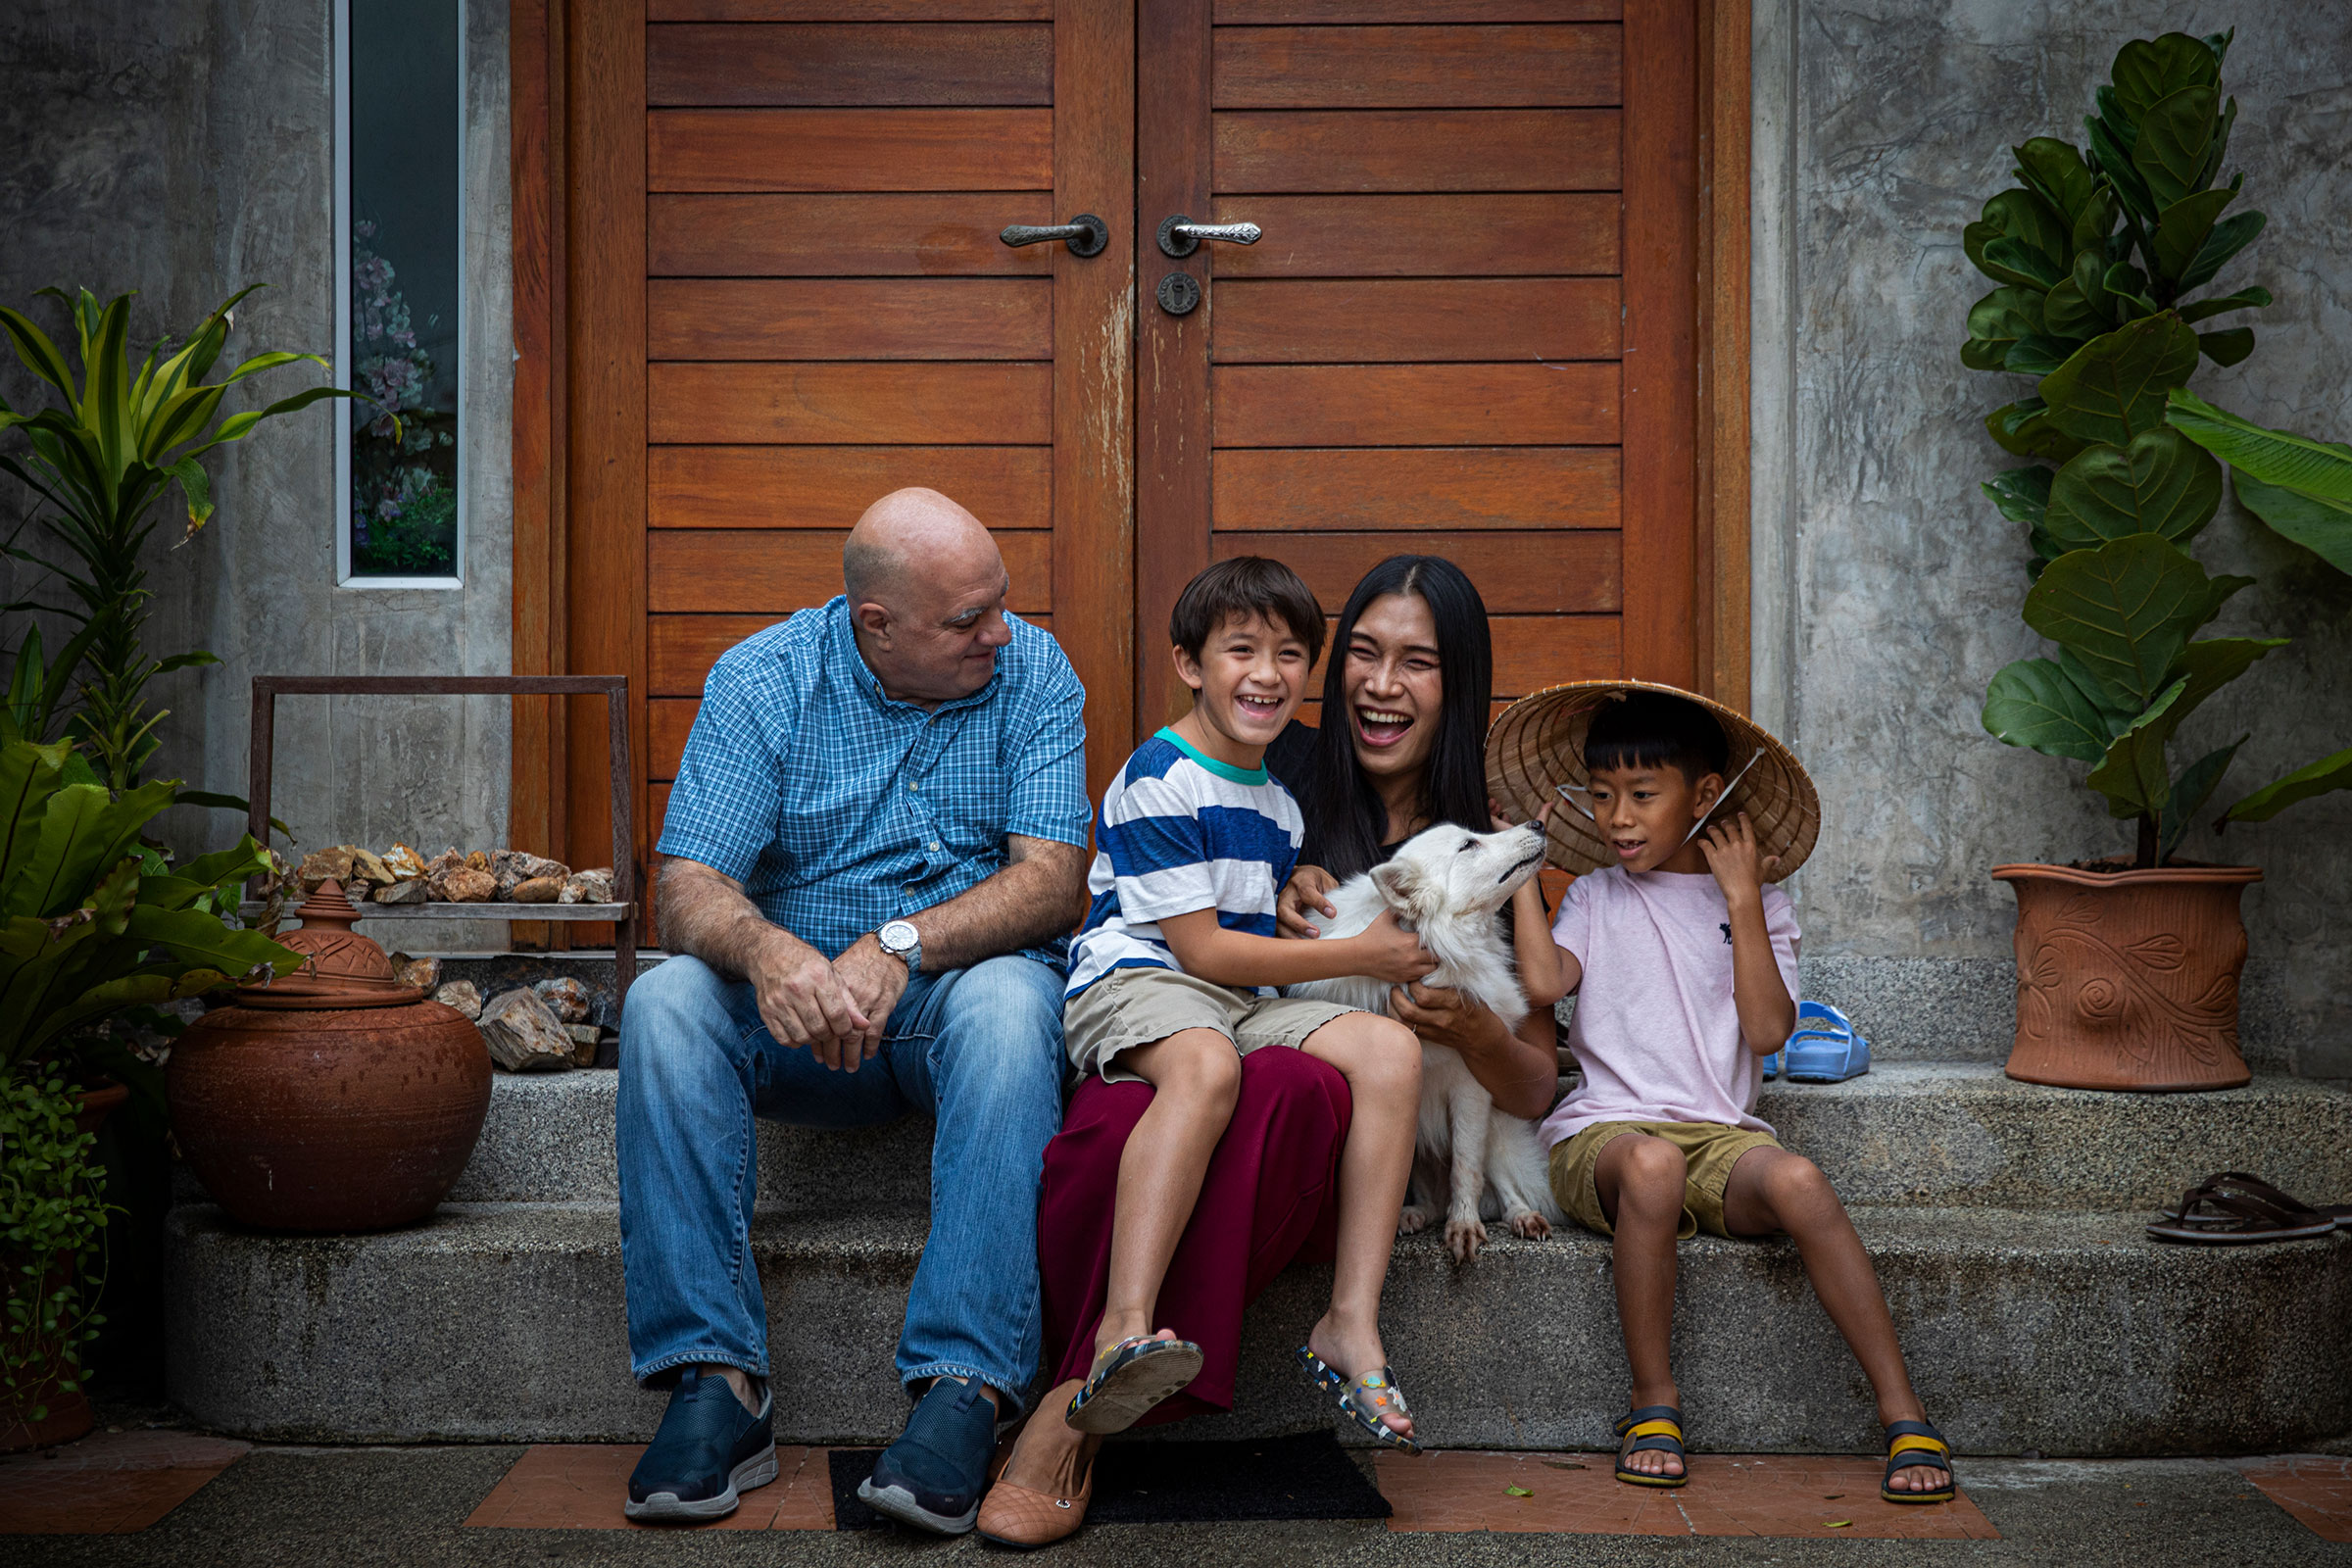 Lee Battia and Ariya "Gina" Milintanapa pose for a portrait with their children, Chene and Charlie, and their dog Casper, in front of their family's home on July 12, 2022 in Bangkok, Thailand.  Ariya "Gina" Milintanapa, a Thai transgender woman, and her American partner, Lee Battia, live in Bangkok, Thailand with their two children, Chene, 8, and Charlie, 6. Although the couple has been together for nearly 20 years, due to the country's conservative marriage laws, Gina and Lee have been unable to officially marry in Thailand, leading to struggles over joint guardianship of their two children. Under current laws, Lee currently has guardianship rights to Chene and Gina has guardianship rights to Charlie. While globally Thailand is considered an inclusive and accepting country for LGBTQ communities and tourists, those living in Thailand struggle for equal rights as courts historically ruled against same-sex marriage. Couples like Gina and Lee hold out hope for joint custody as Thailand's parliament preliminarily approved a bill to recognize same-sex marriage on June 15, 2022. Photo by Lauren DeCicca for TIME